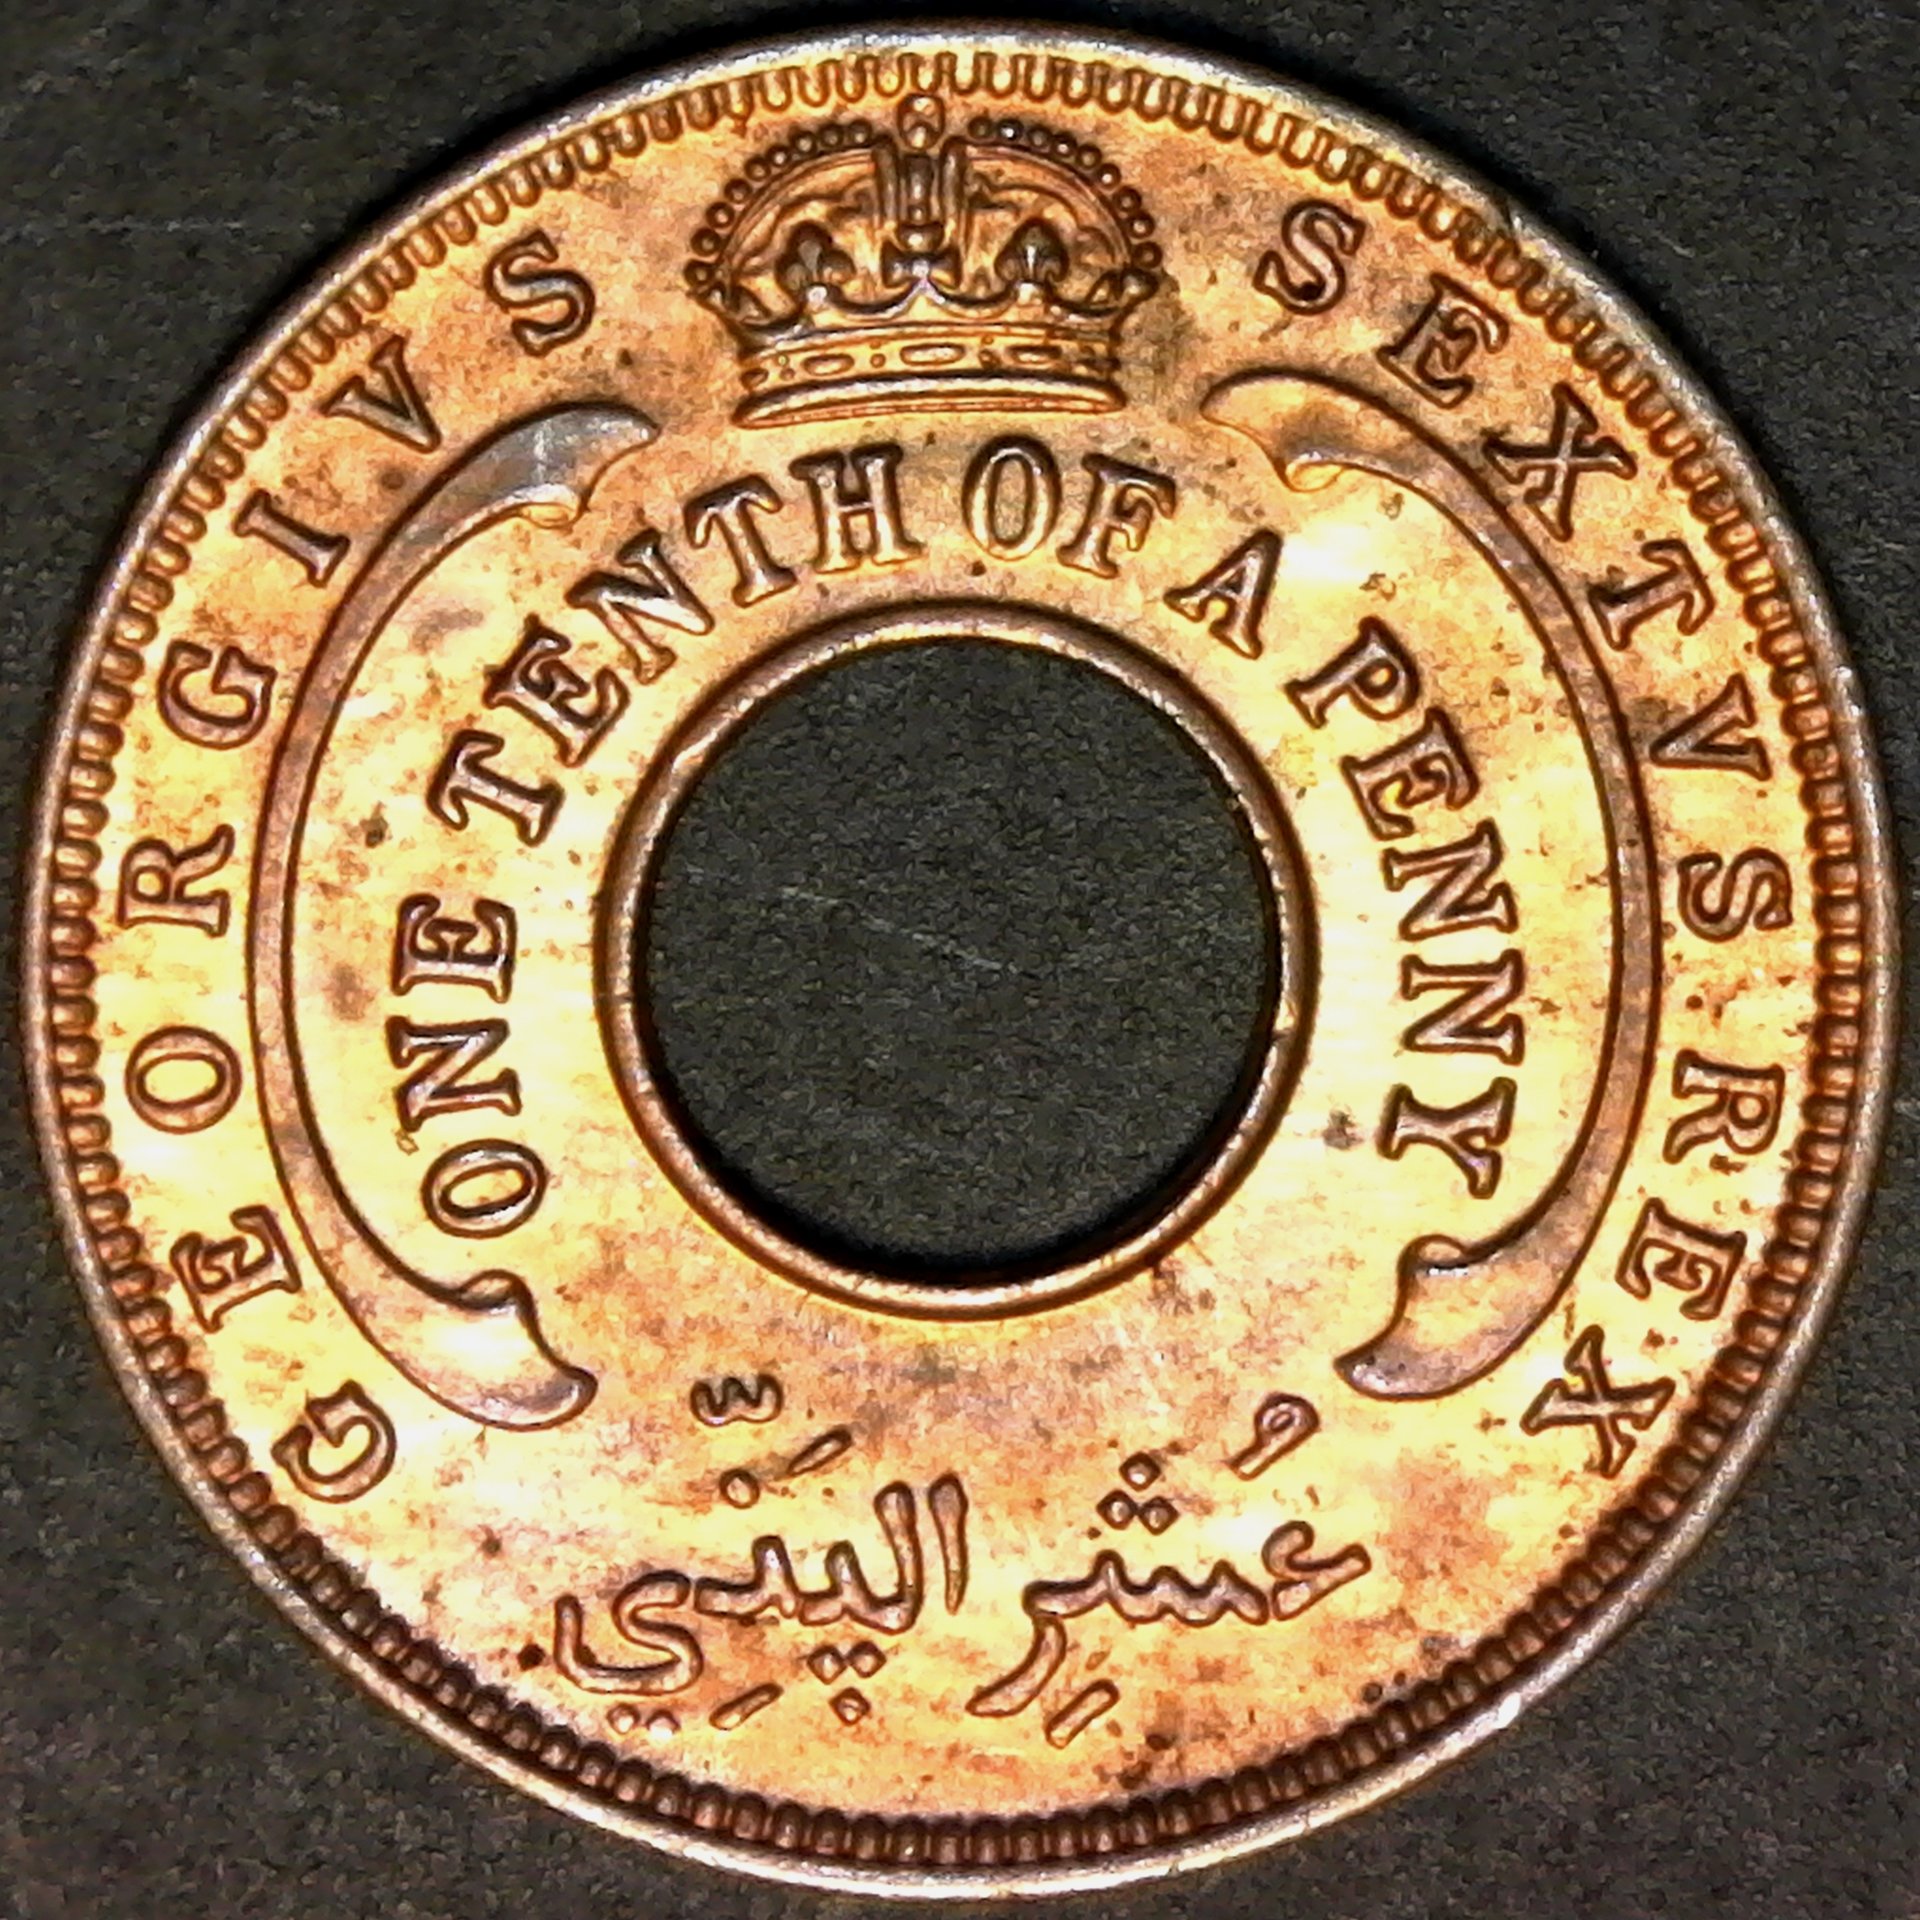 British West Africa One Tenth of a Penny 1952 rev.jpg